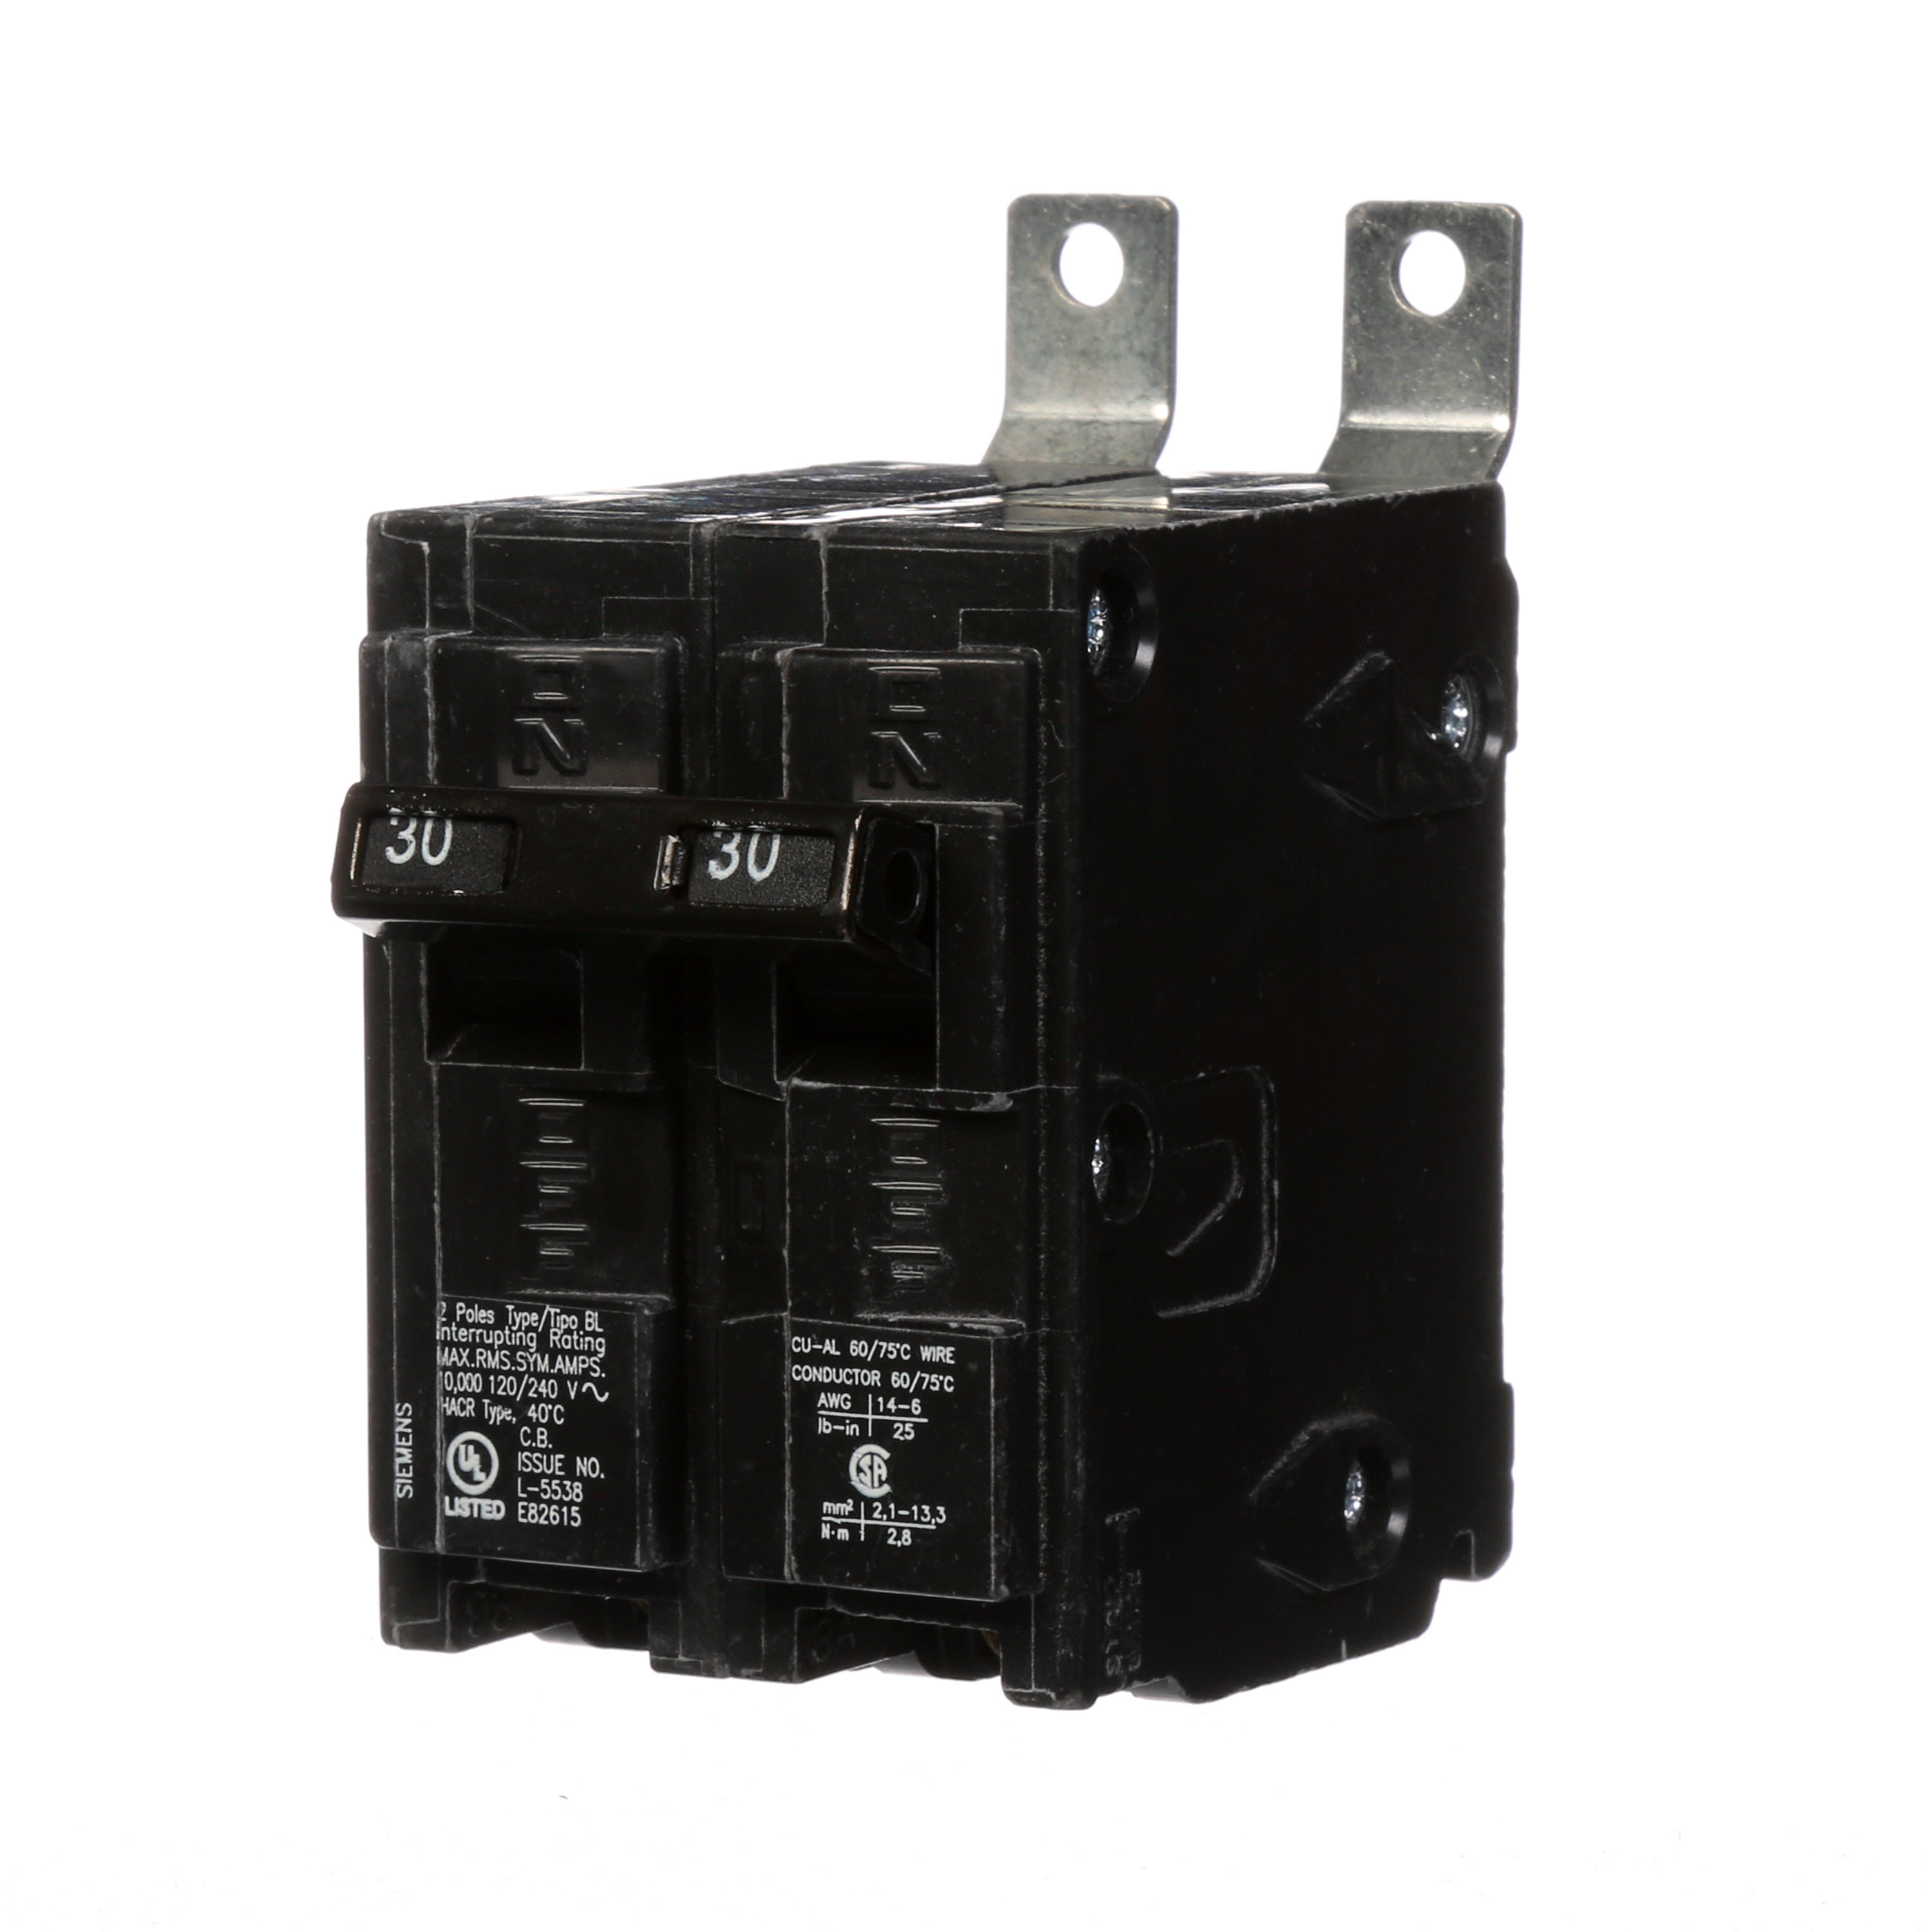 Siemens Low Voltage Molded Case Circuit Breakers Panelboard Mounting 240V Circuit Breakers - Type BL, 2-Pole, 120/240VAC are Circuit Protection Molded Case Circuit Breakers. Type BL Application Electrical Distribution Standard UL 489 Voltage Rating 120/240V Am perage Rating 30A Trip Range Thermal Magnetic Interrupt Rating 10 AIC Number Of Poles 2P